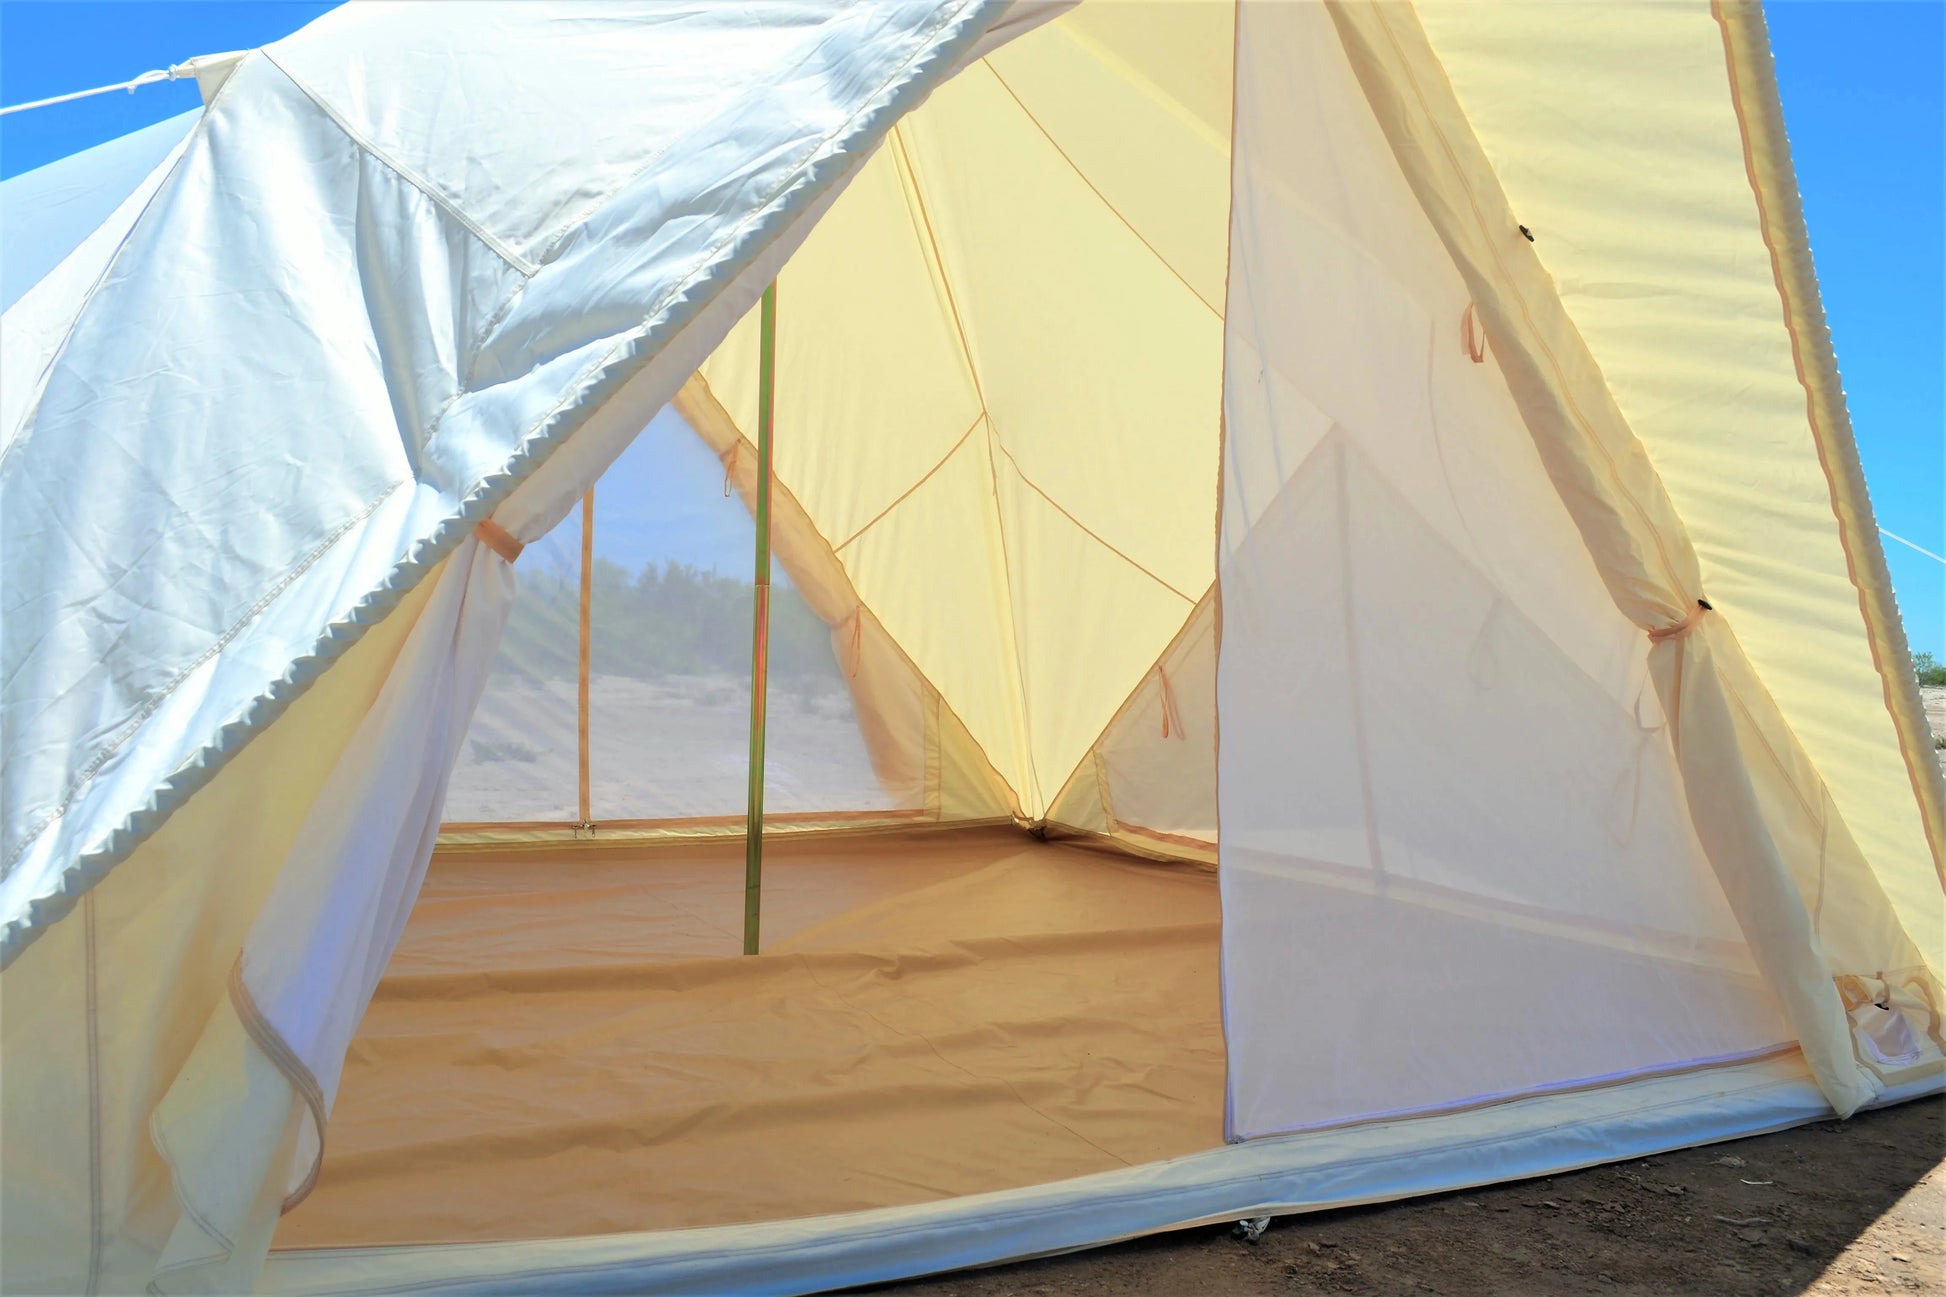 High-end glamping Pyramid Tent with effective rain protection awnings and convenient electricity and A/C compatibility.